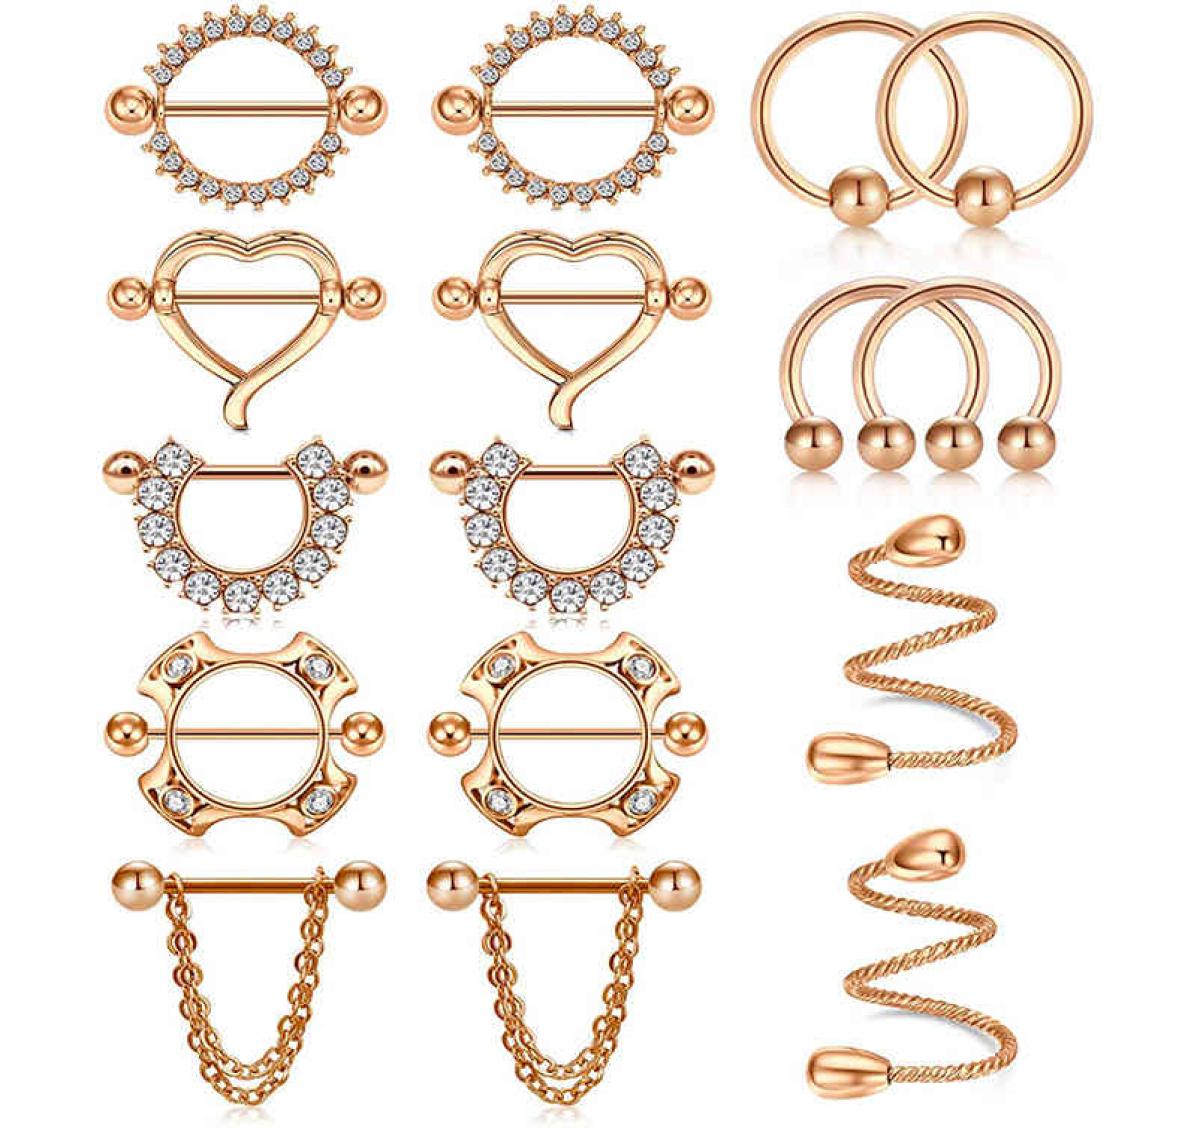 

14G Stainless Steel Straight Barbell Tongue Rings rings Women CZ Heart Chain Dangle Nipple Piercing9143129